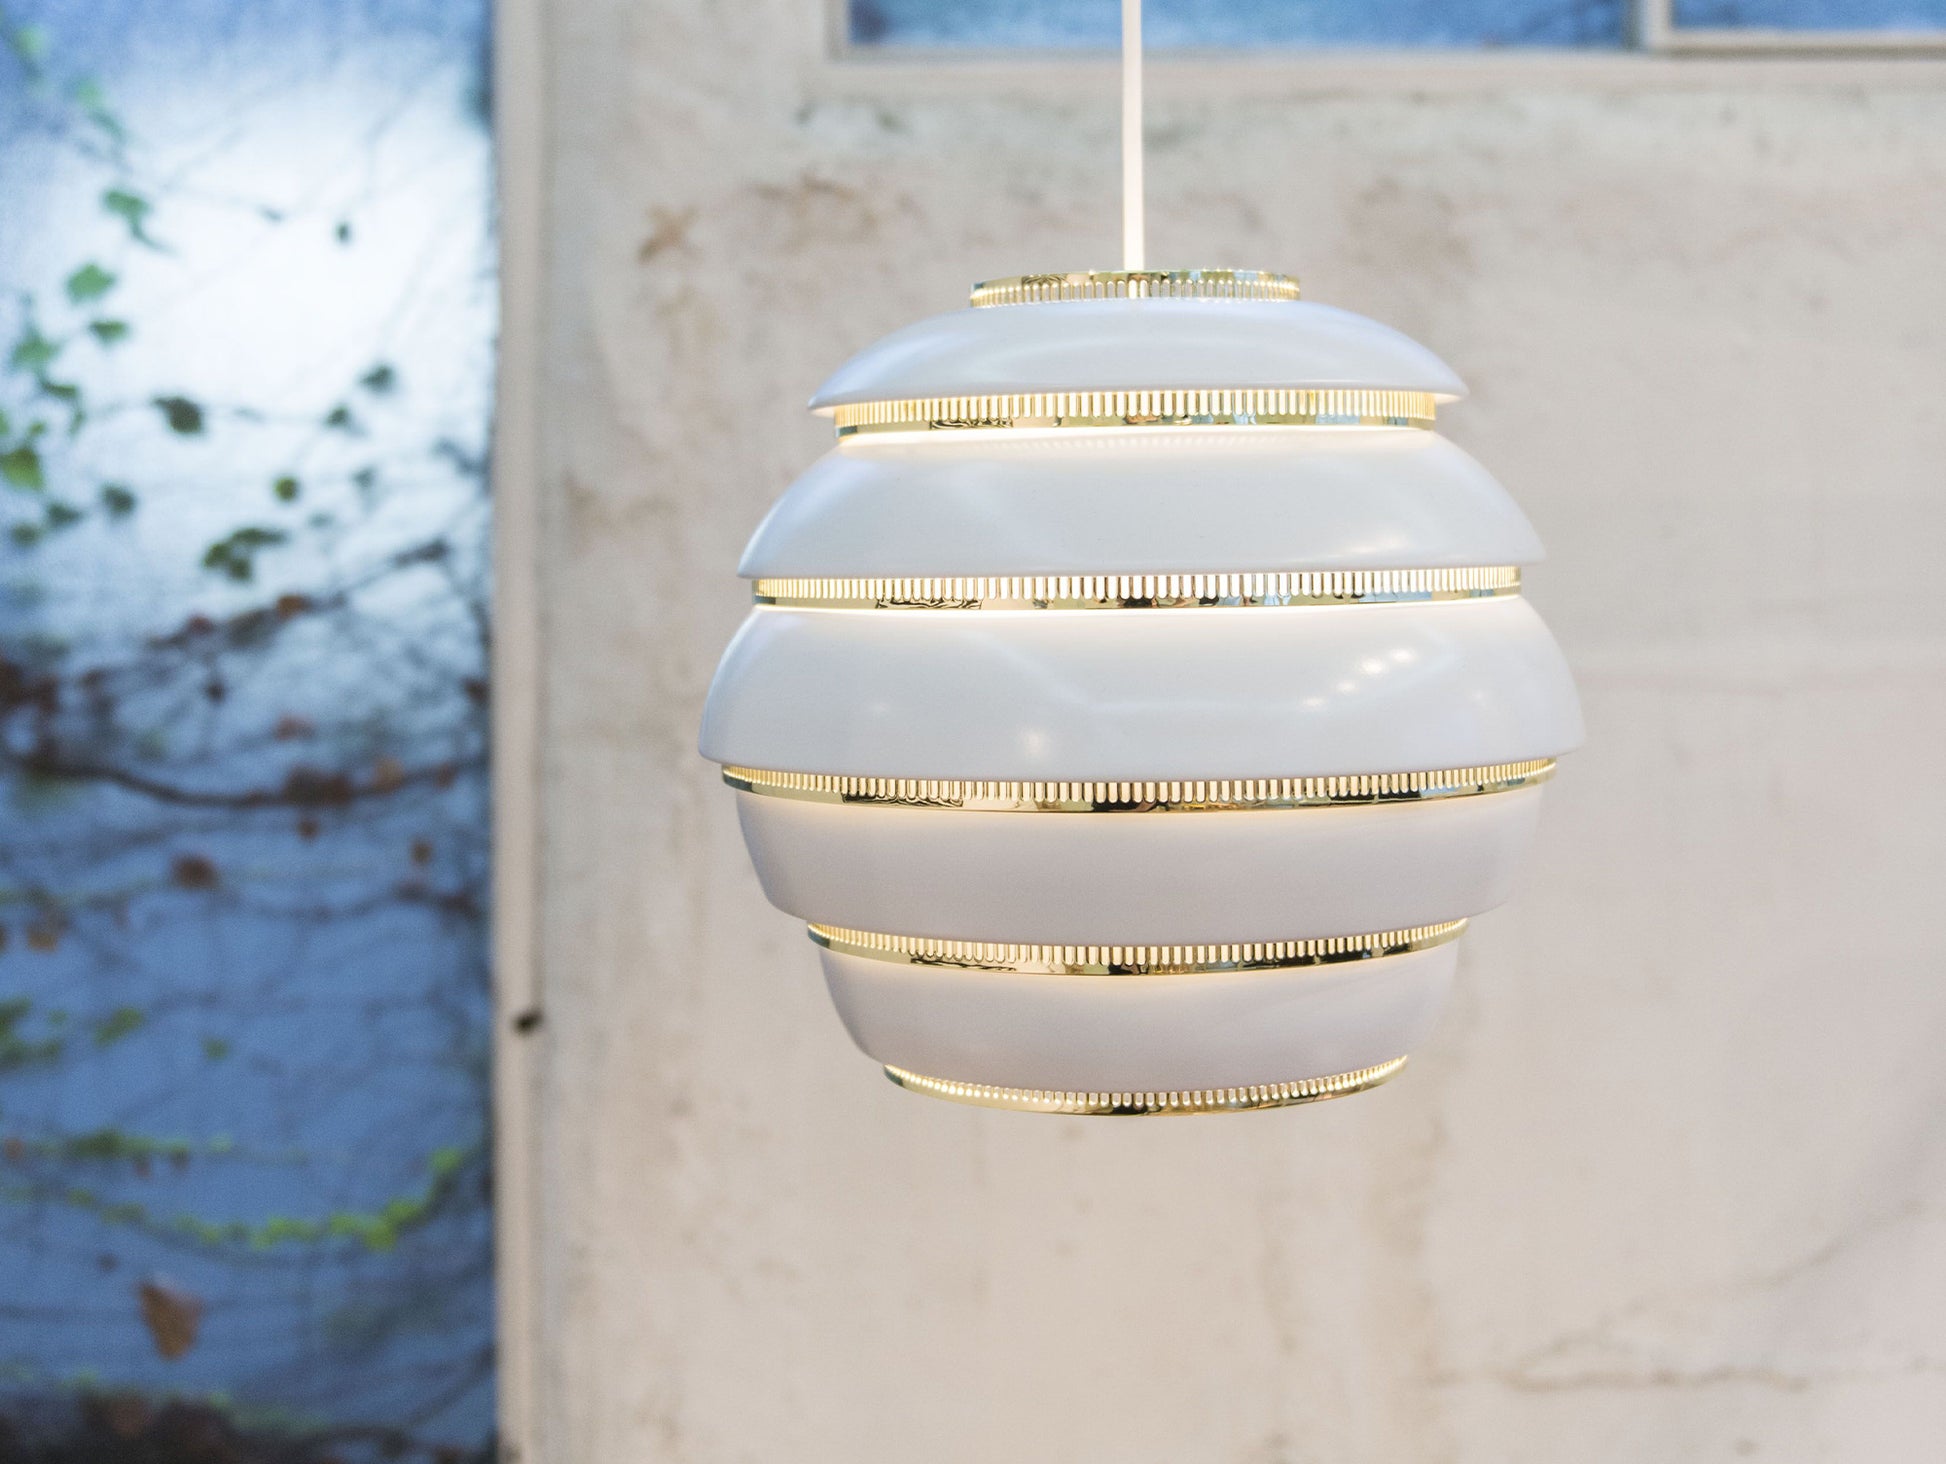 A331 Beehive Pendant Light by Artek - White Aluminium Shade with Brass Rings